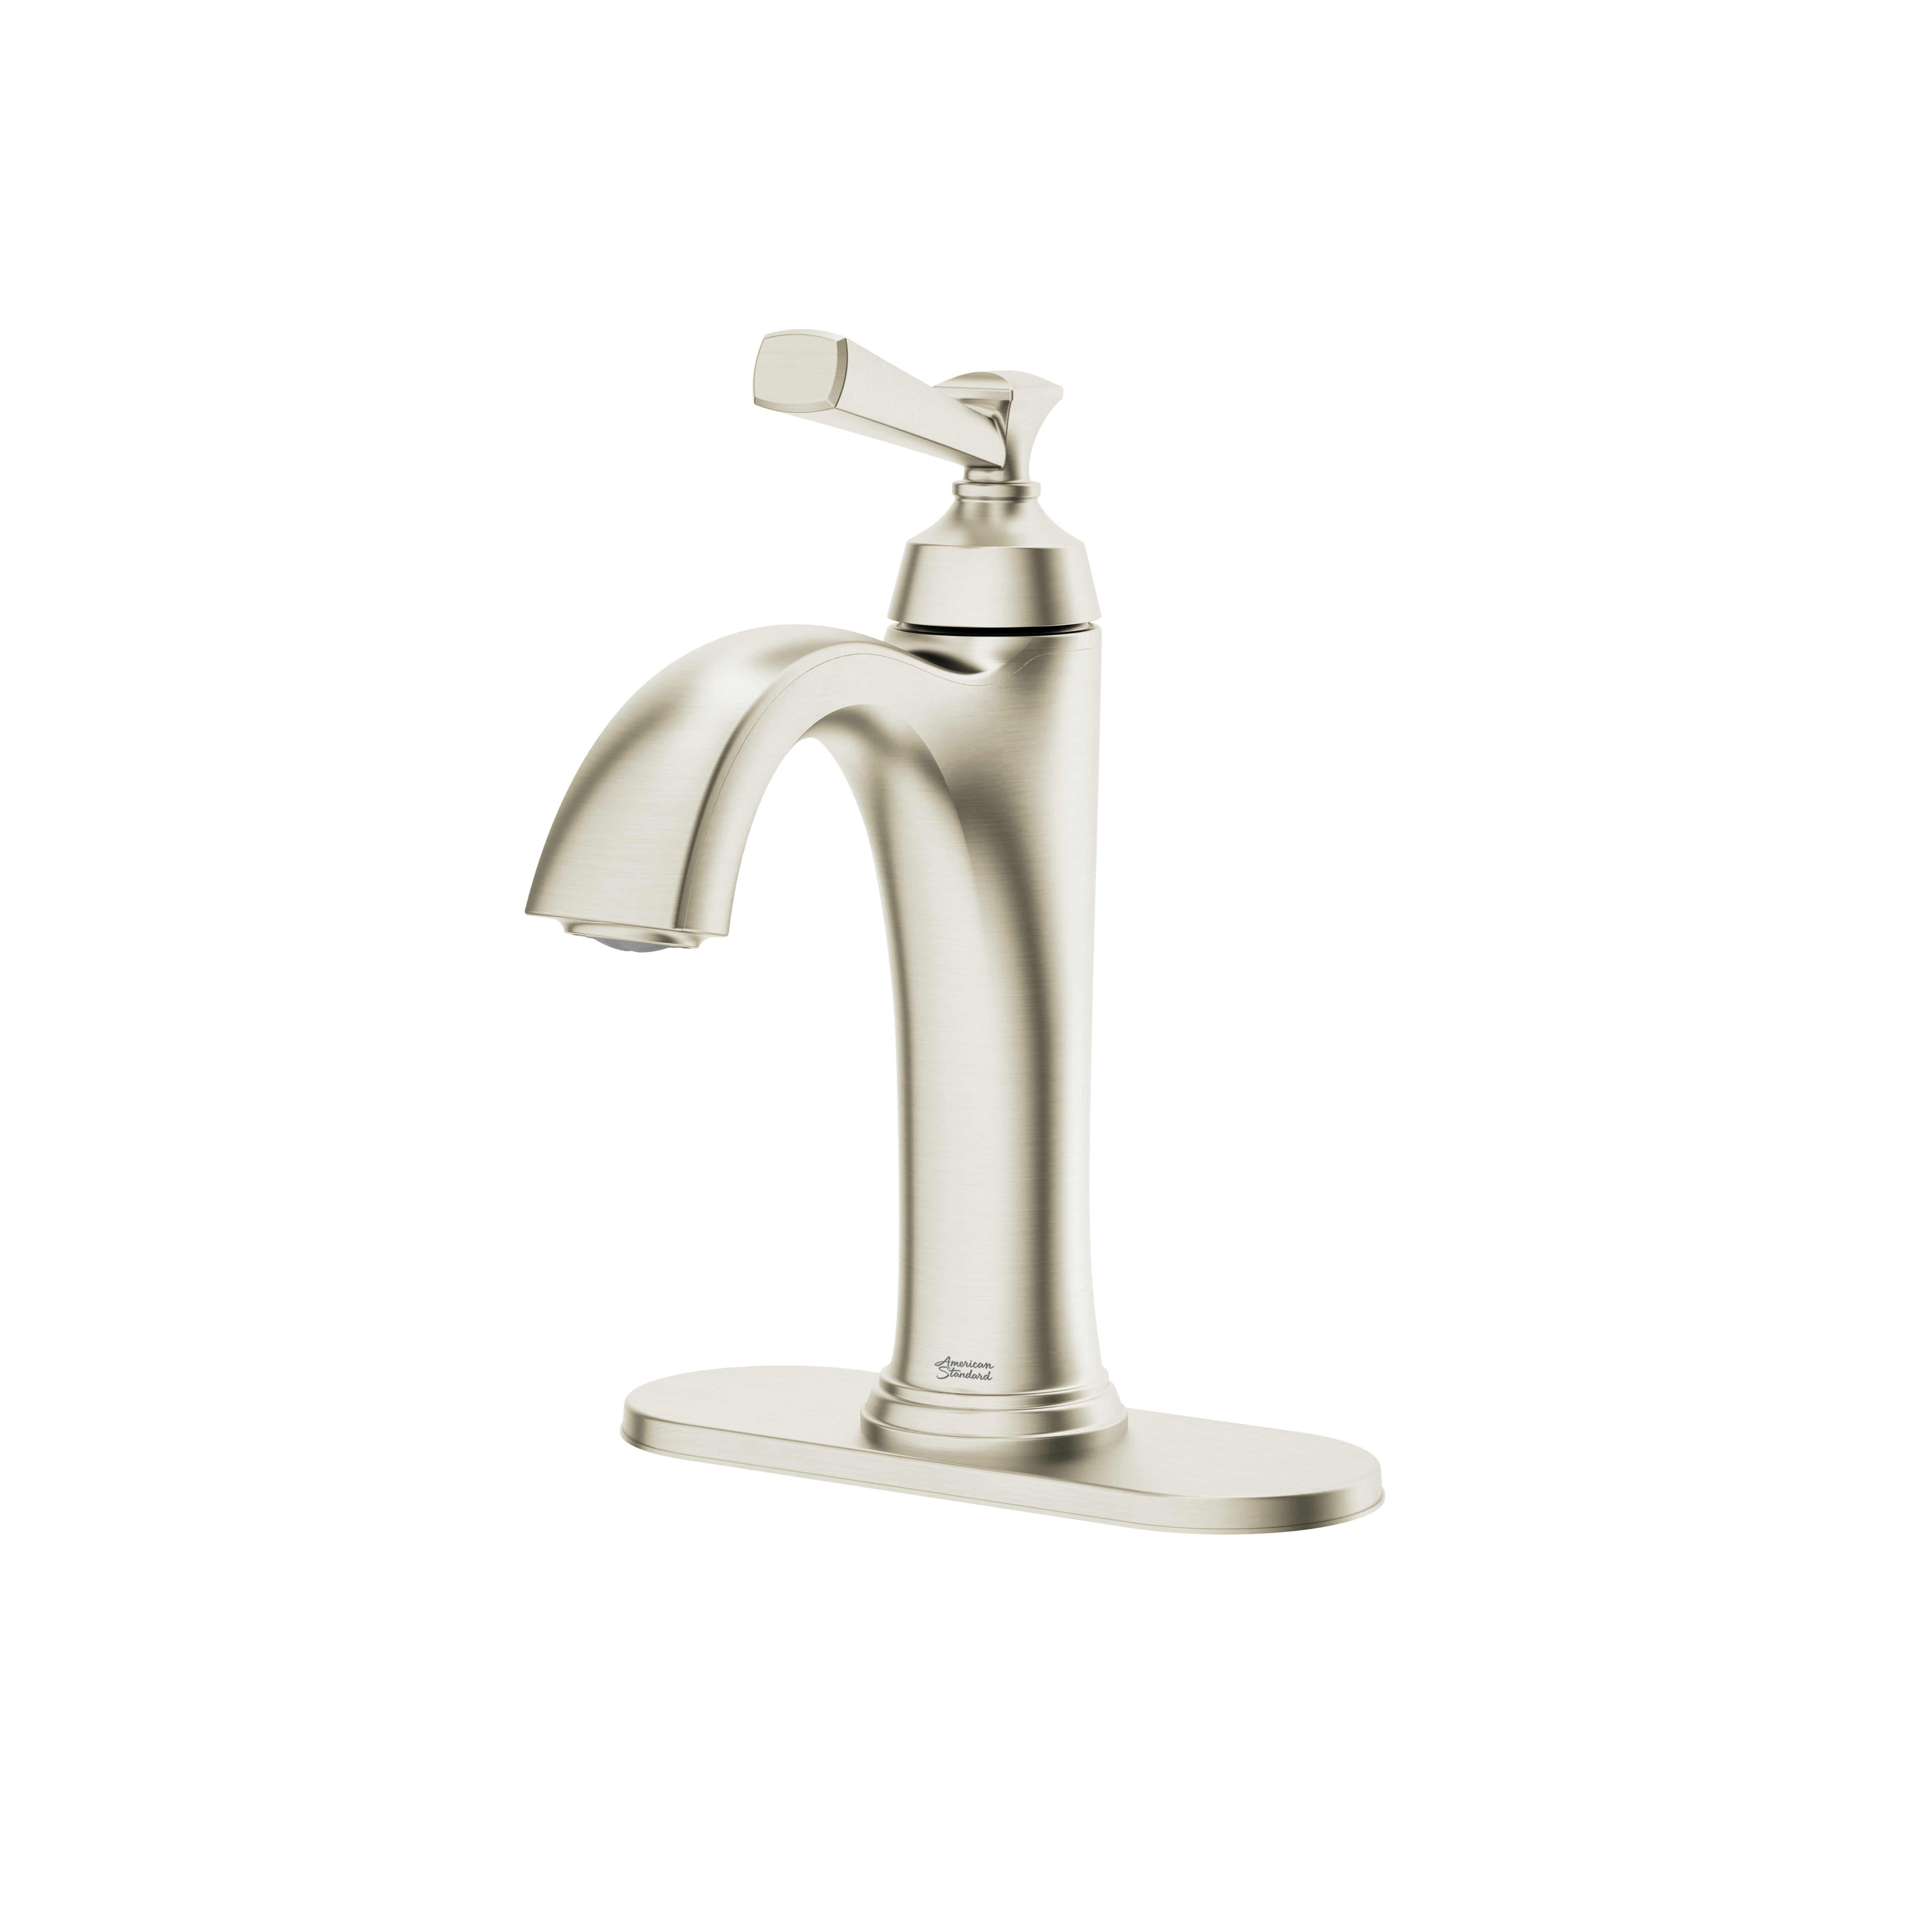 Rumson® Single Hole Single-Handle Bathroom Faucet 1.2 gpm/4.5 L/min With Lever Handle